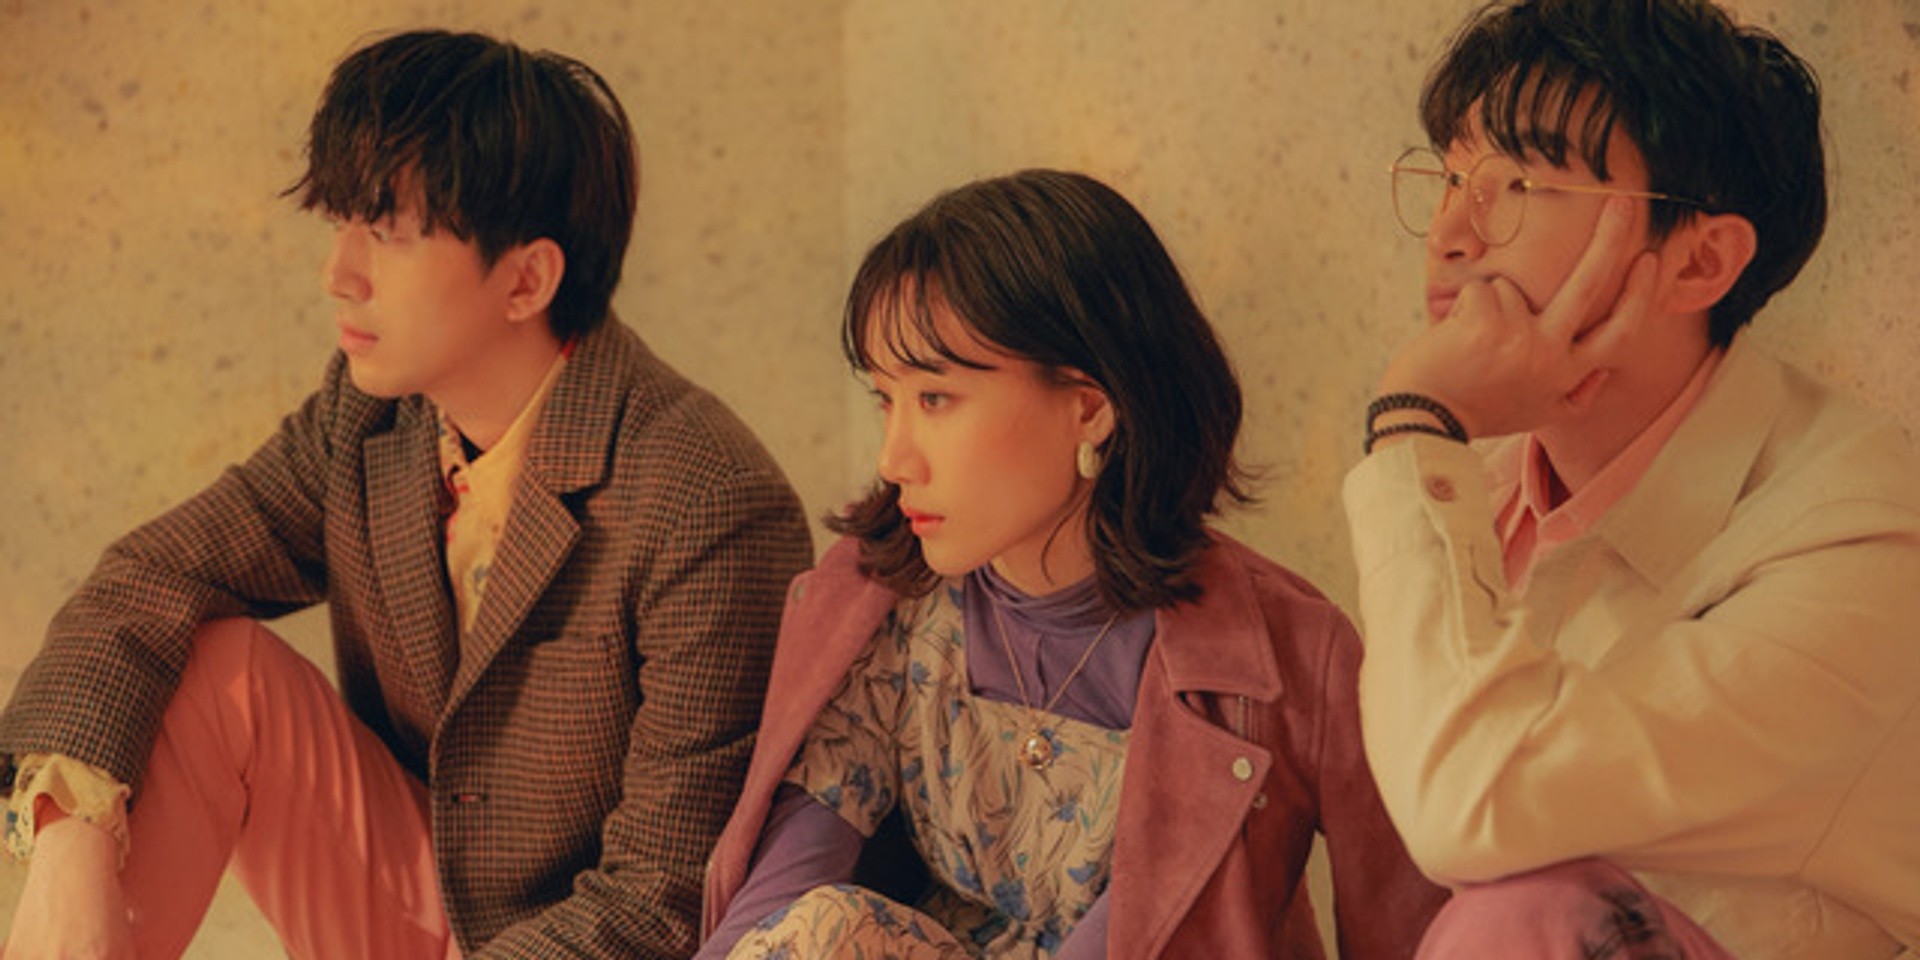 Korean indie band Chamsom to perform in Singapore in February 2020